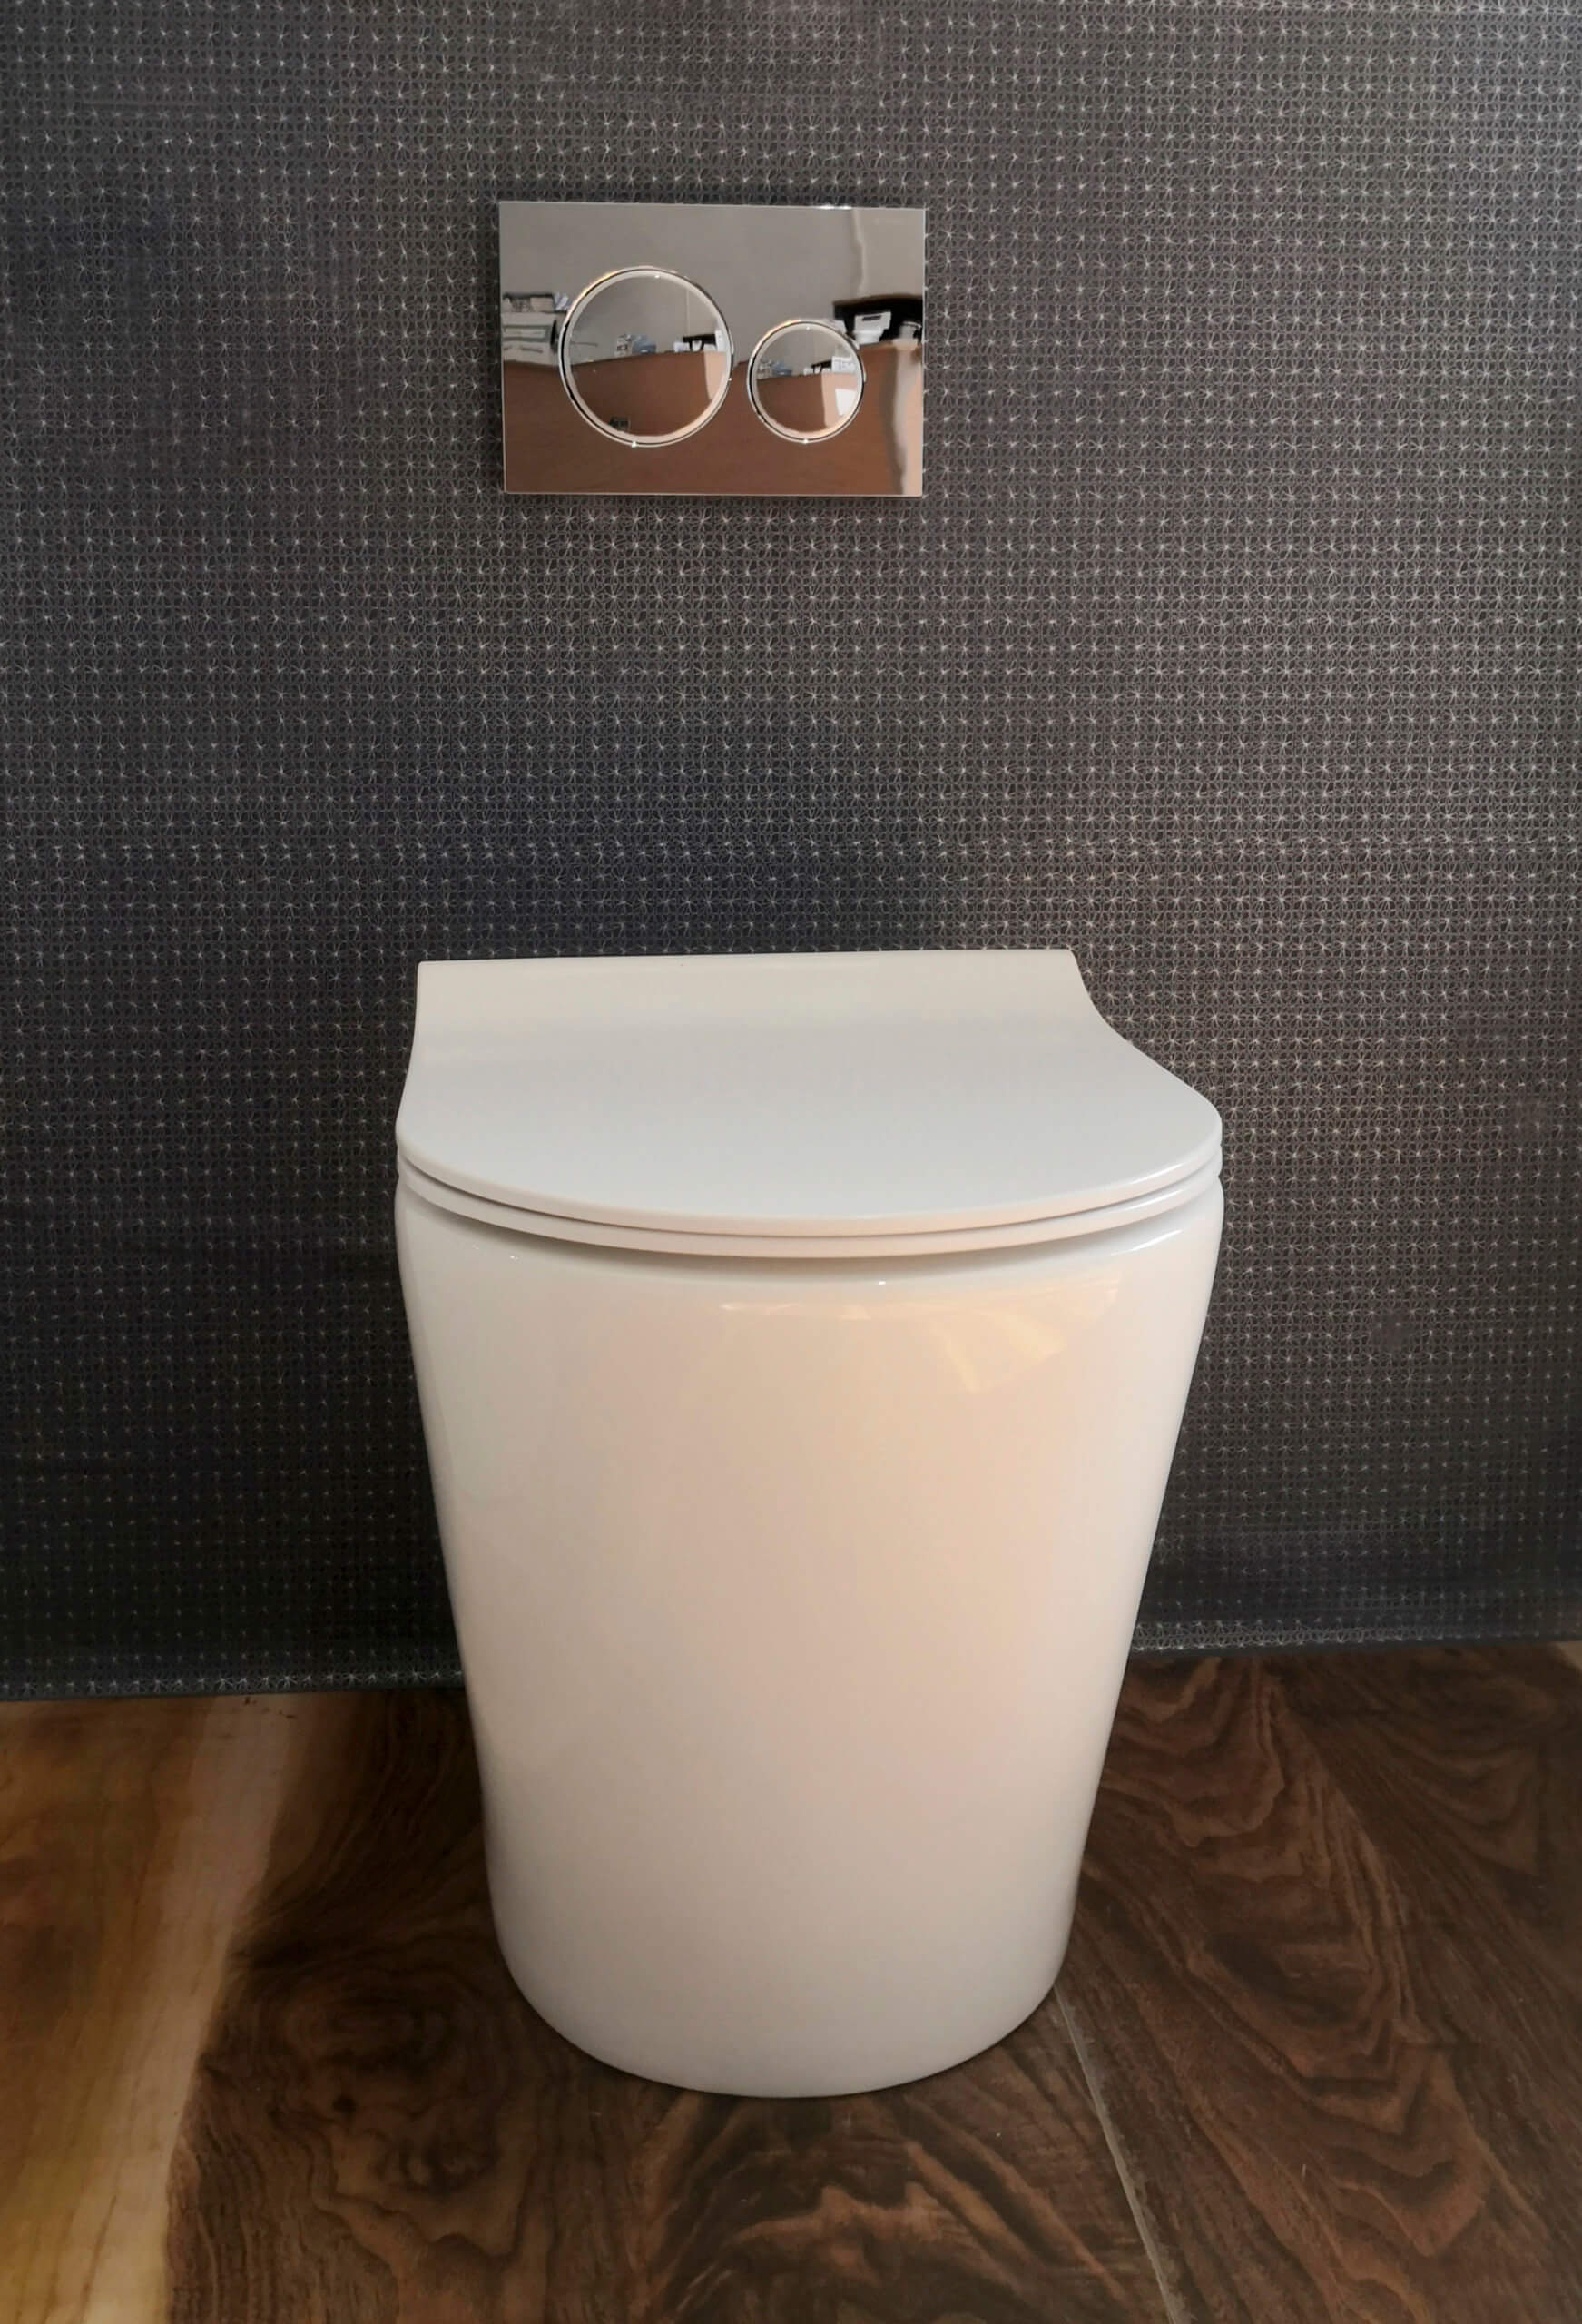 In-wall Toilet Systems